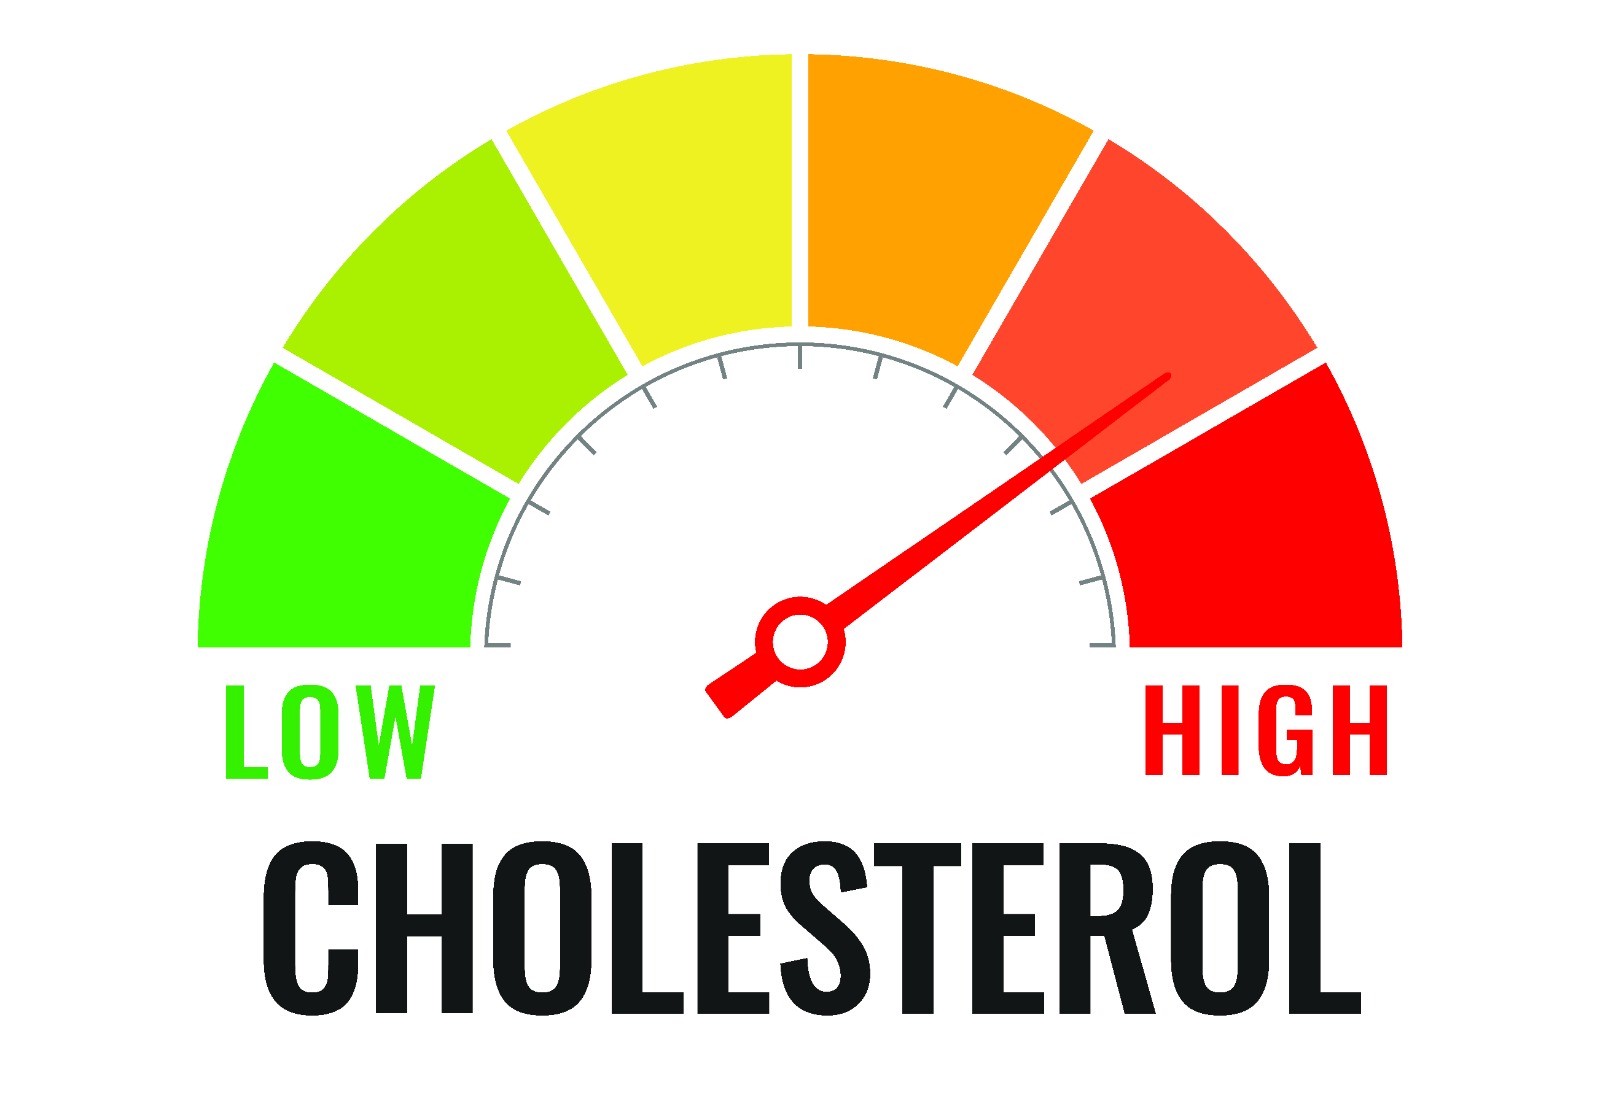 High cholesterol: What you need to know